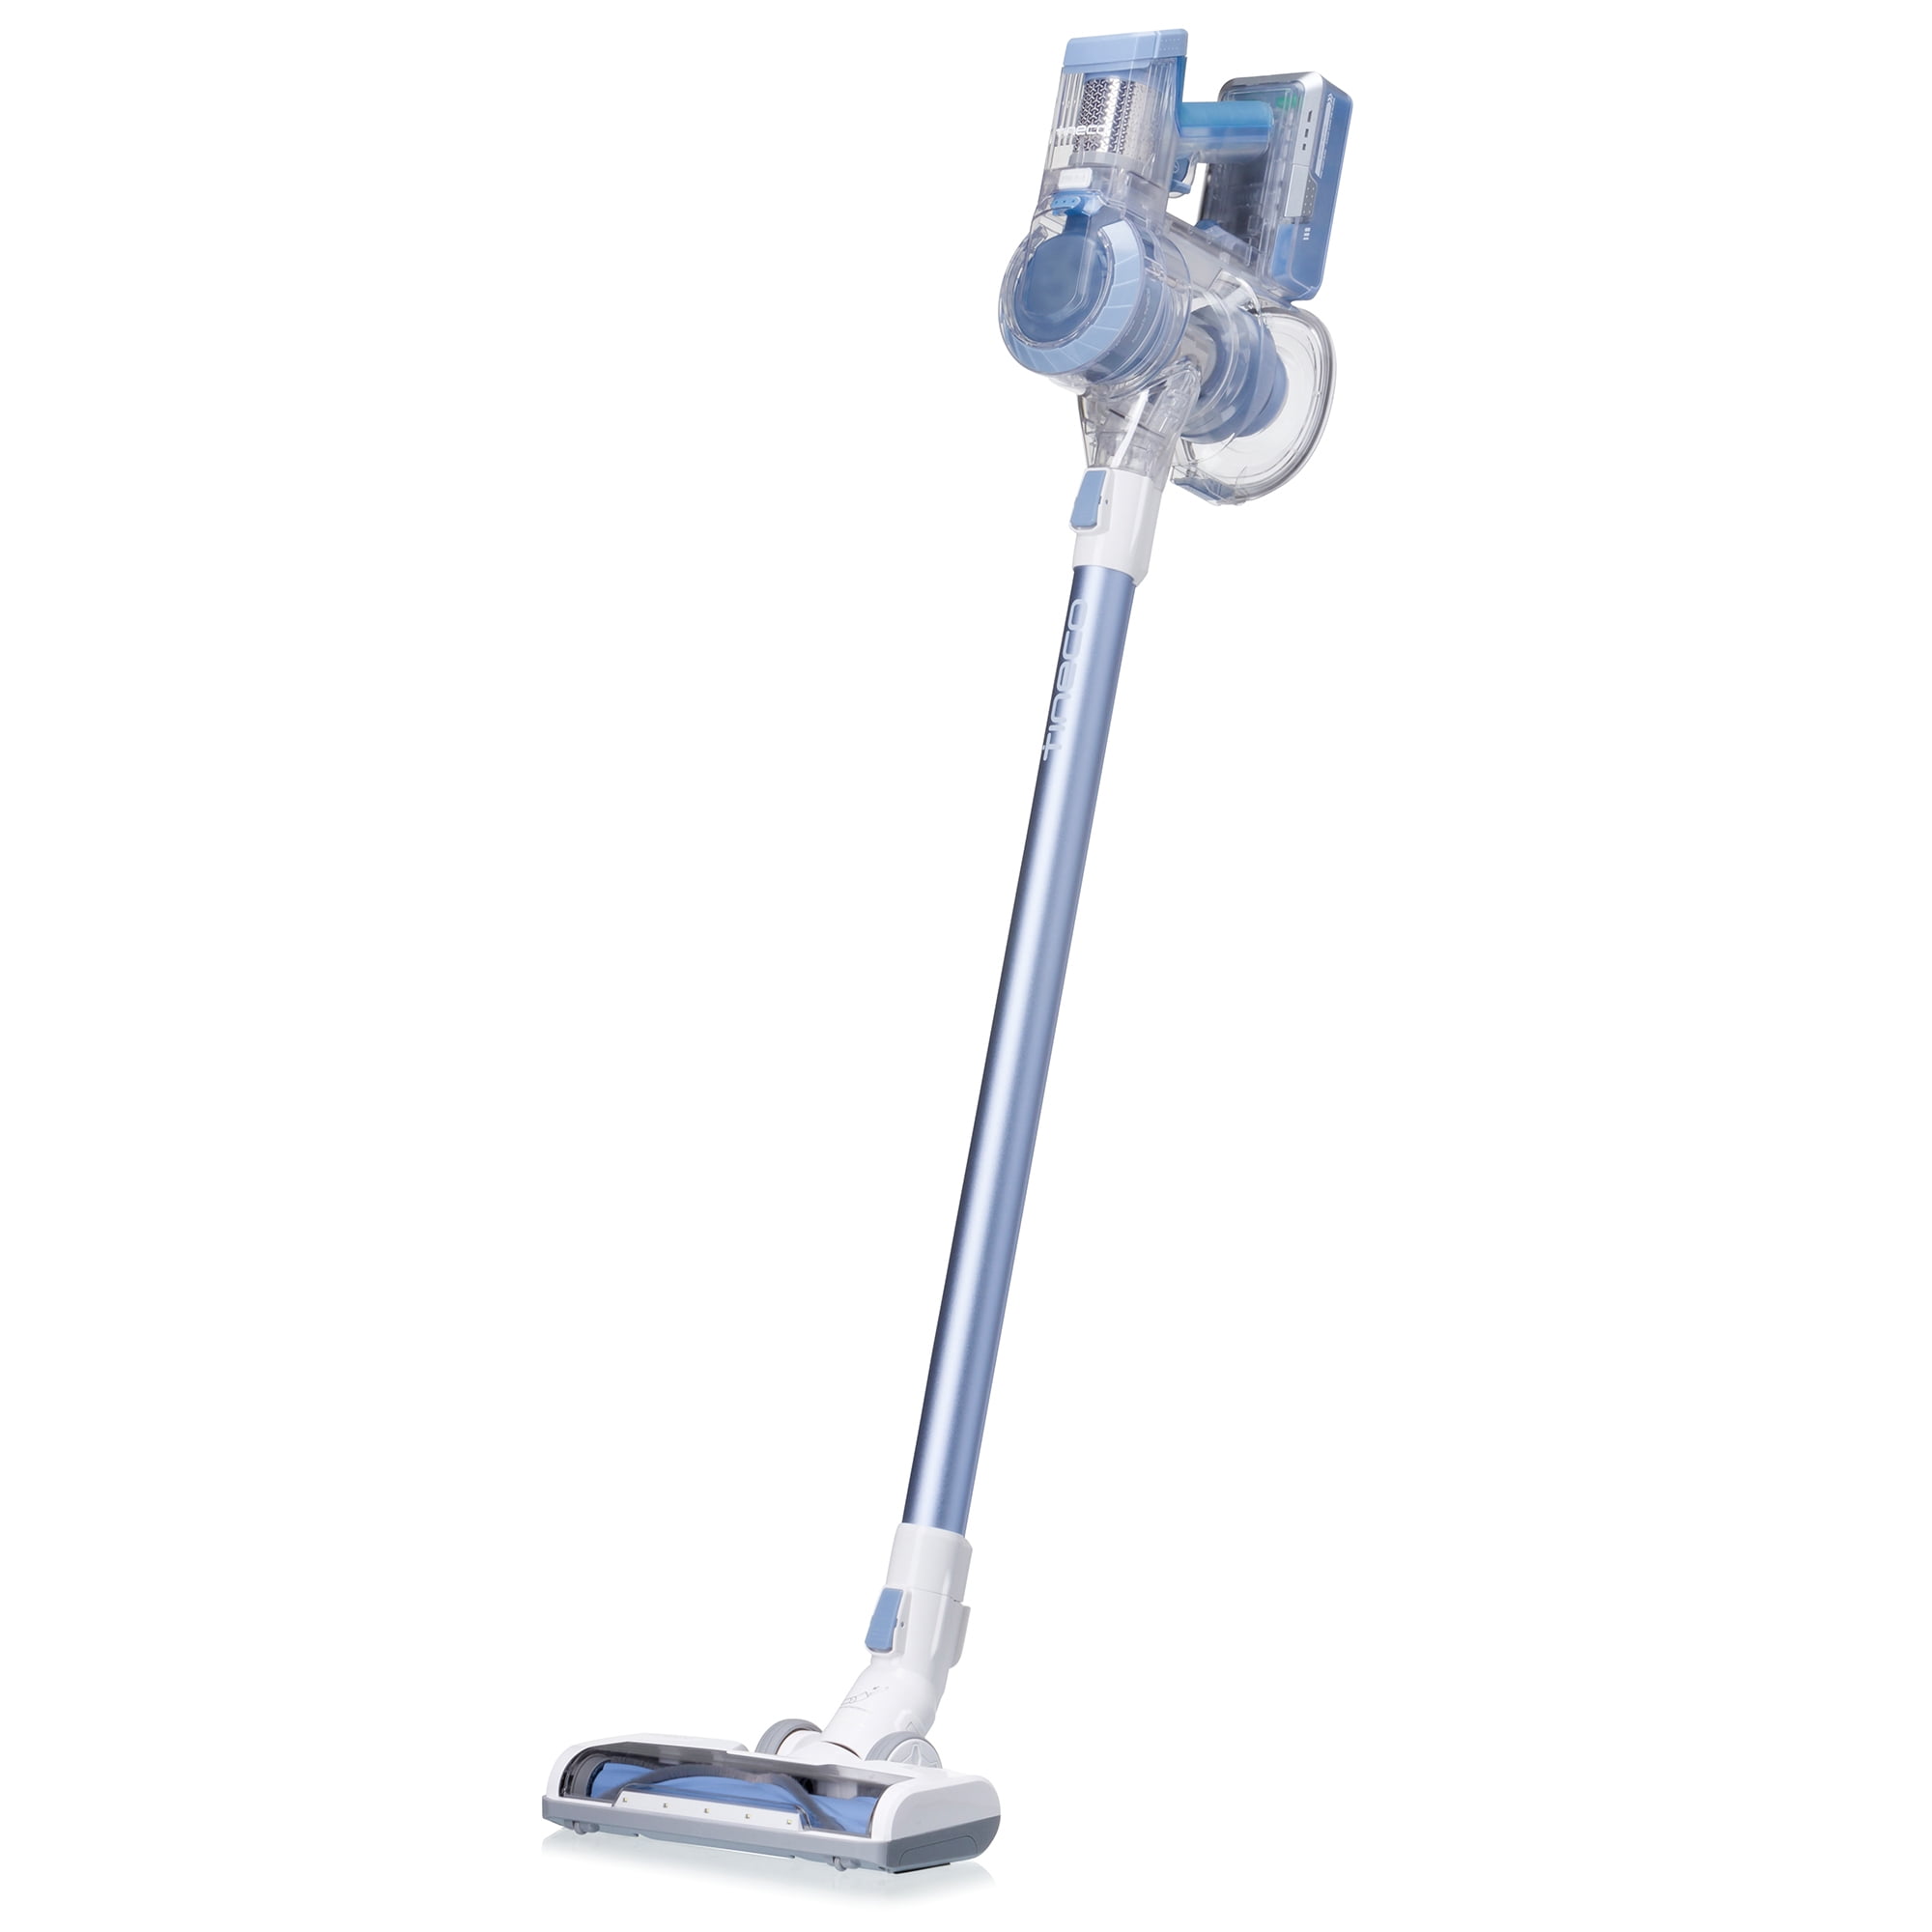 Tineco C3 Powerful Cordless Stick Vacuum Cleaner with Extra Battery - Blue